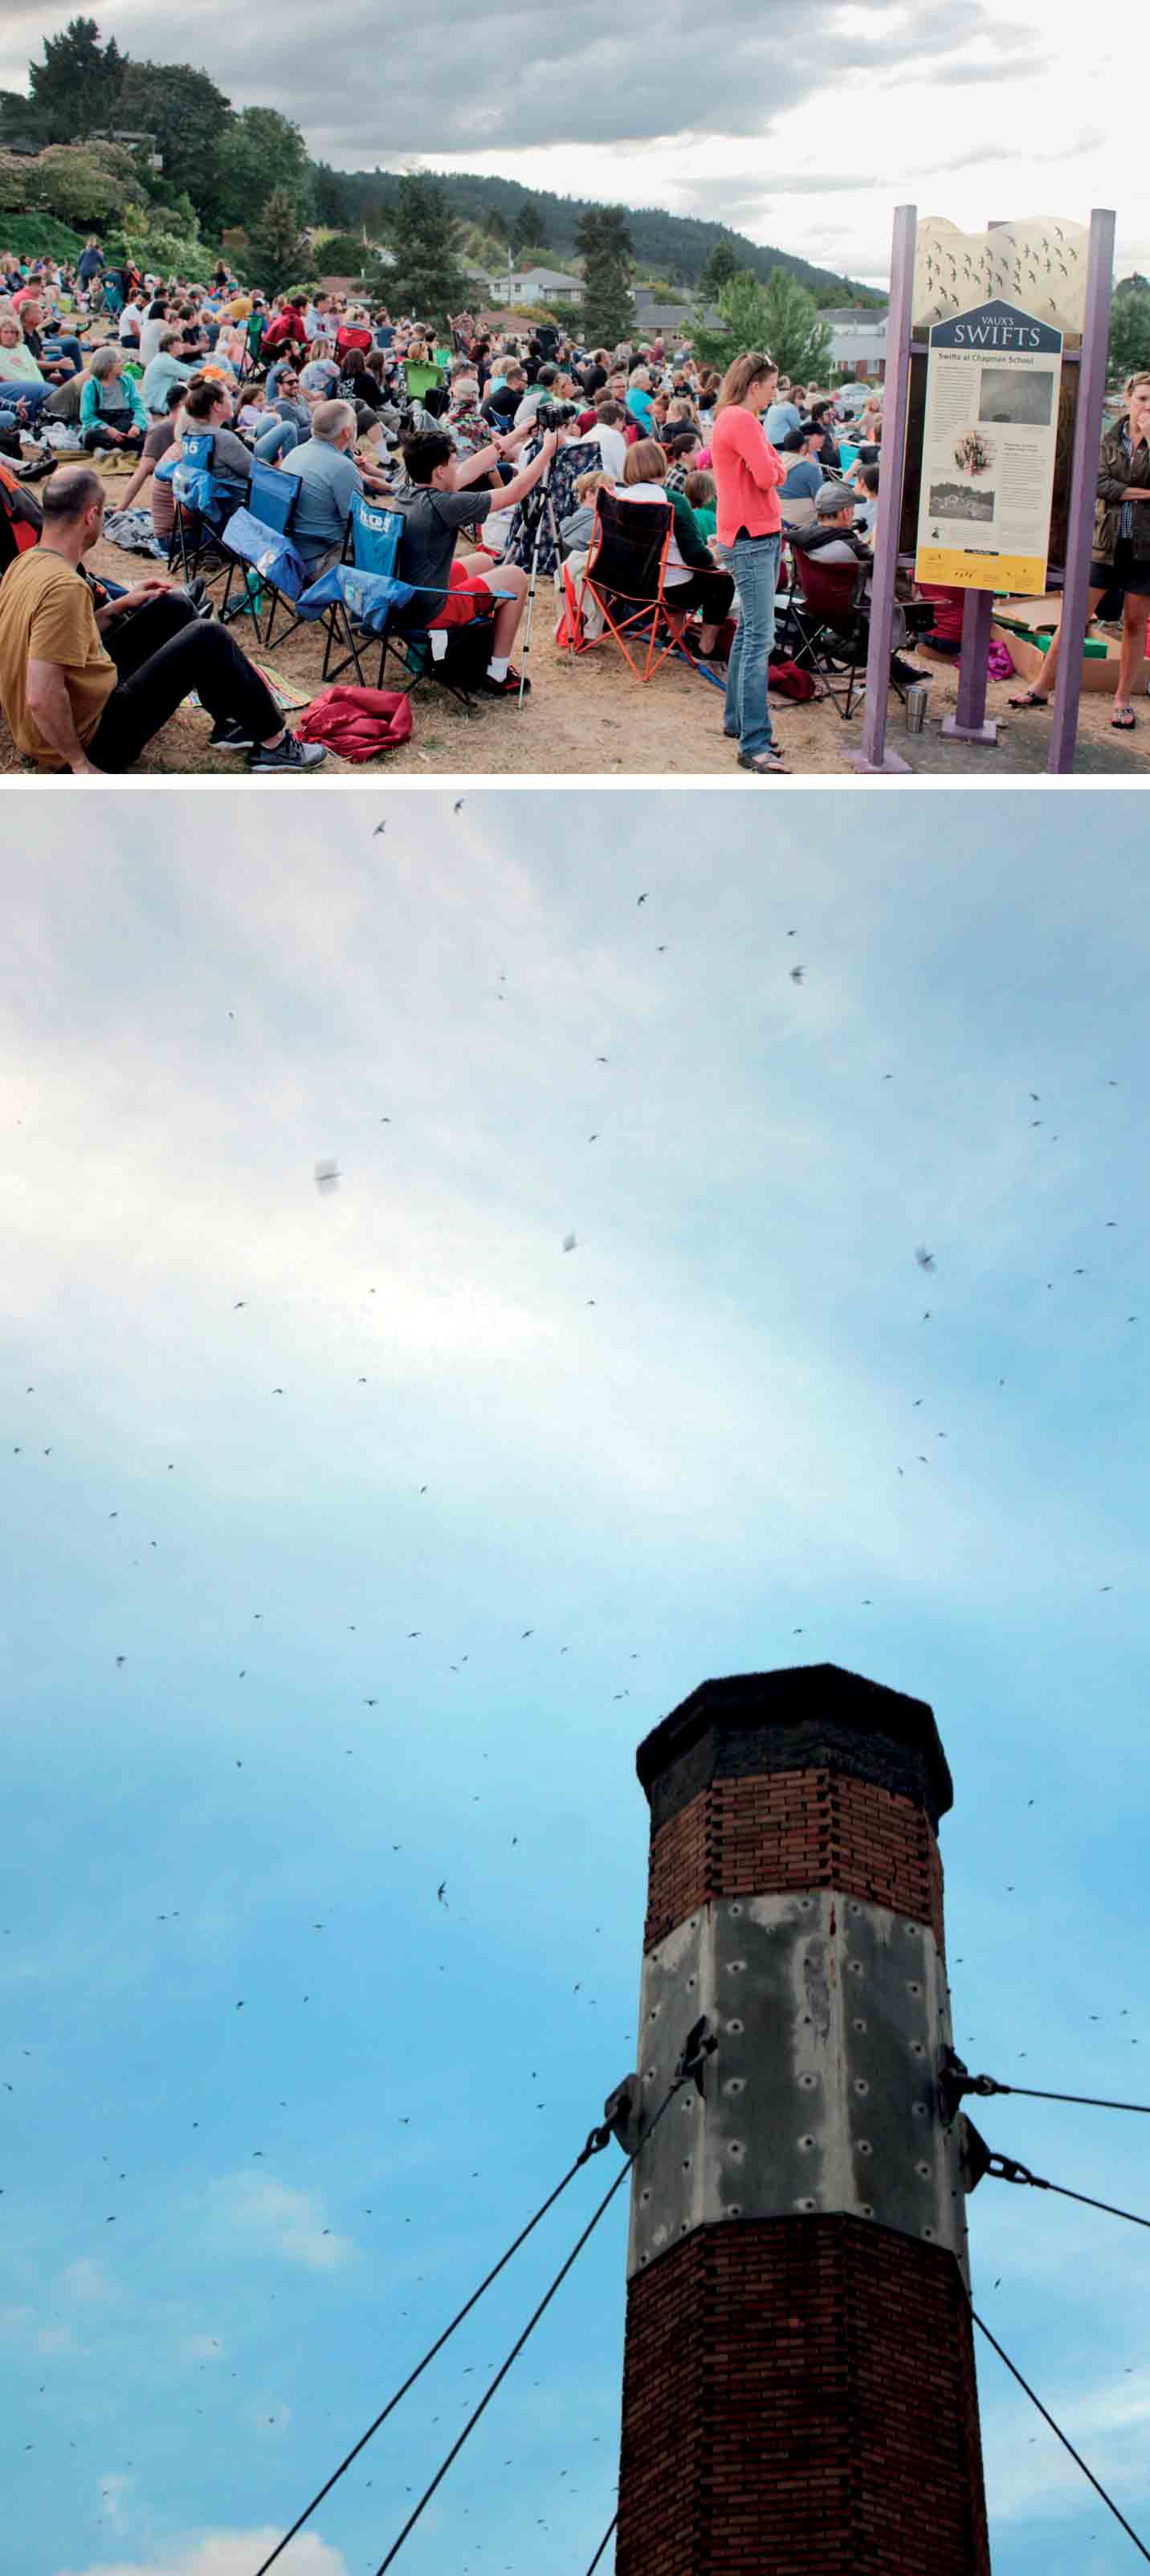 promise-bird-friendly-cities-every-september-evening-residents-portland-oregon-converge-site-chapman-elementary-school-witness-spectacle-thousands-swirling-migrating-faux’s swifts-roost-chimney